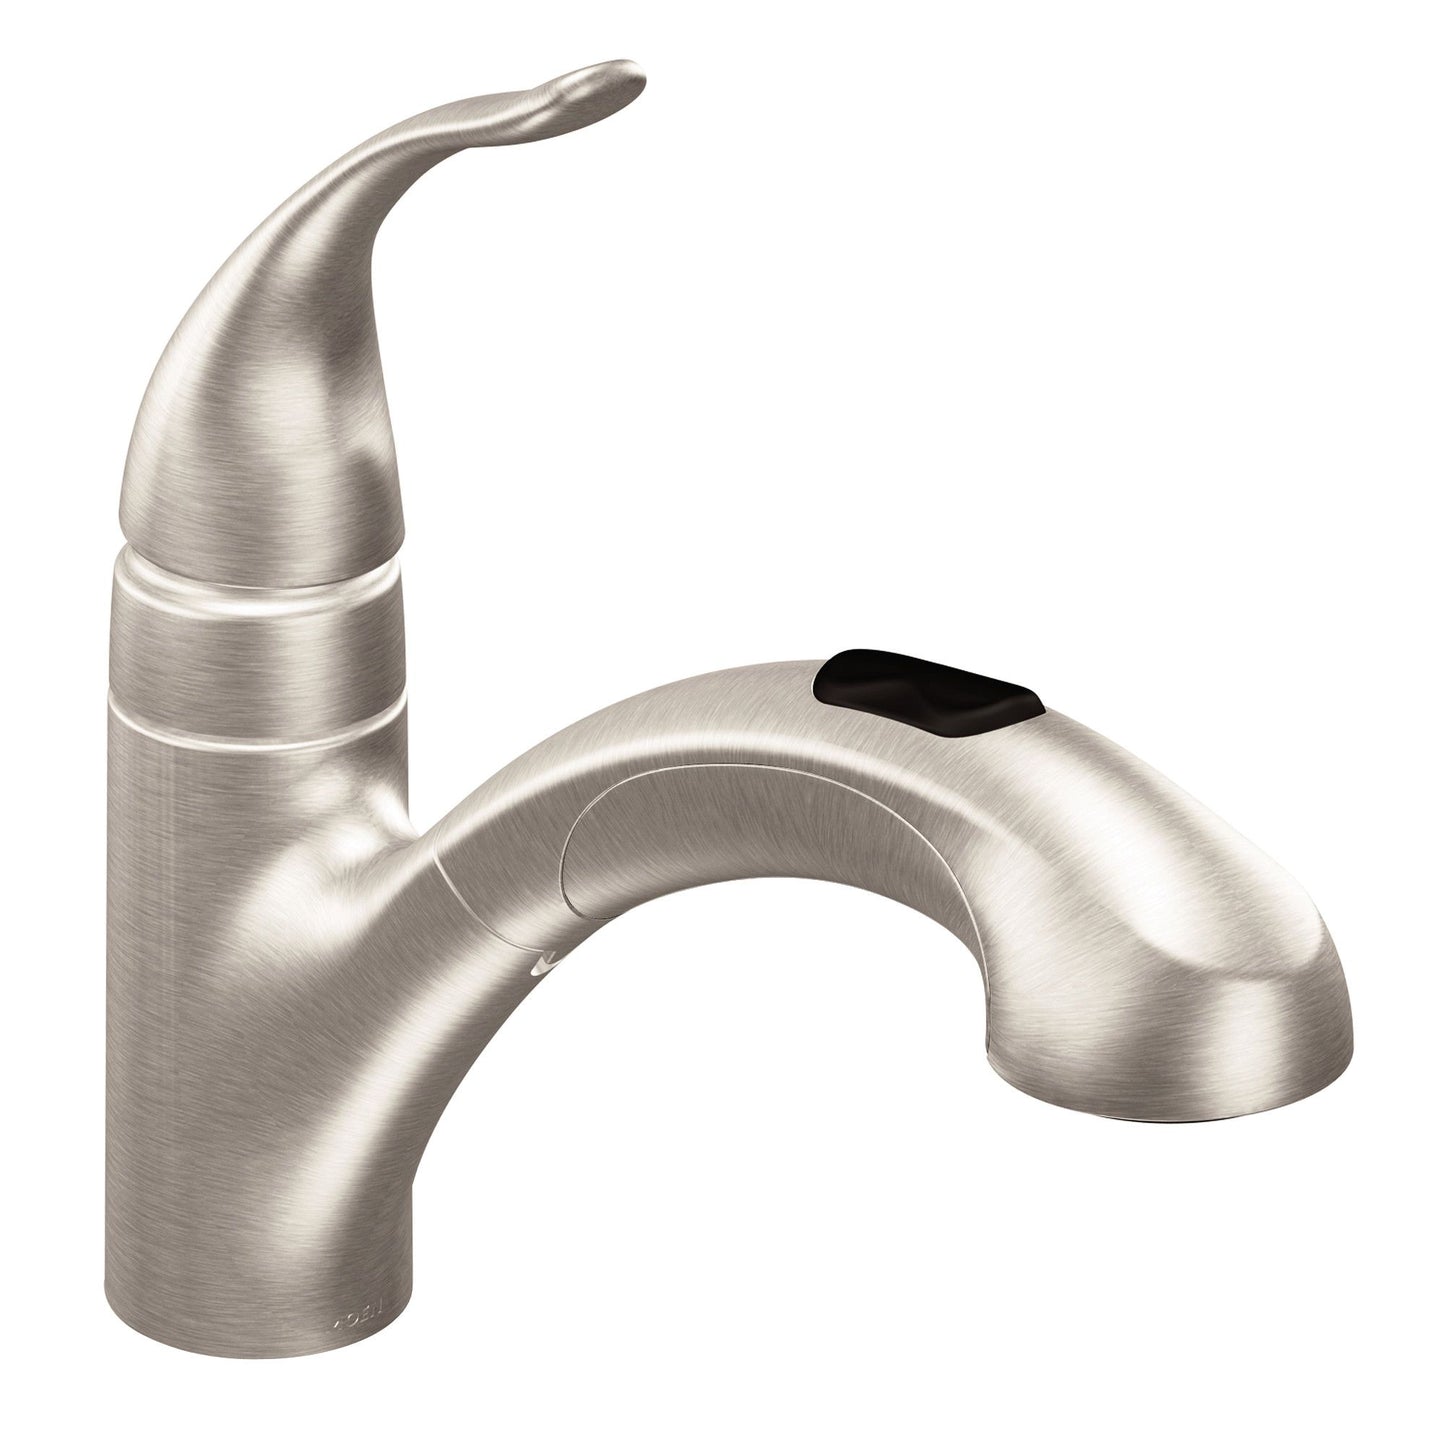 Integra One-Handle Low Arc Pullout Kitchen Faucet